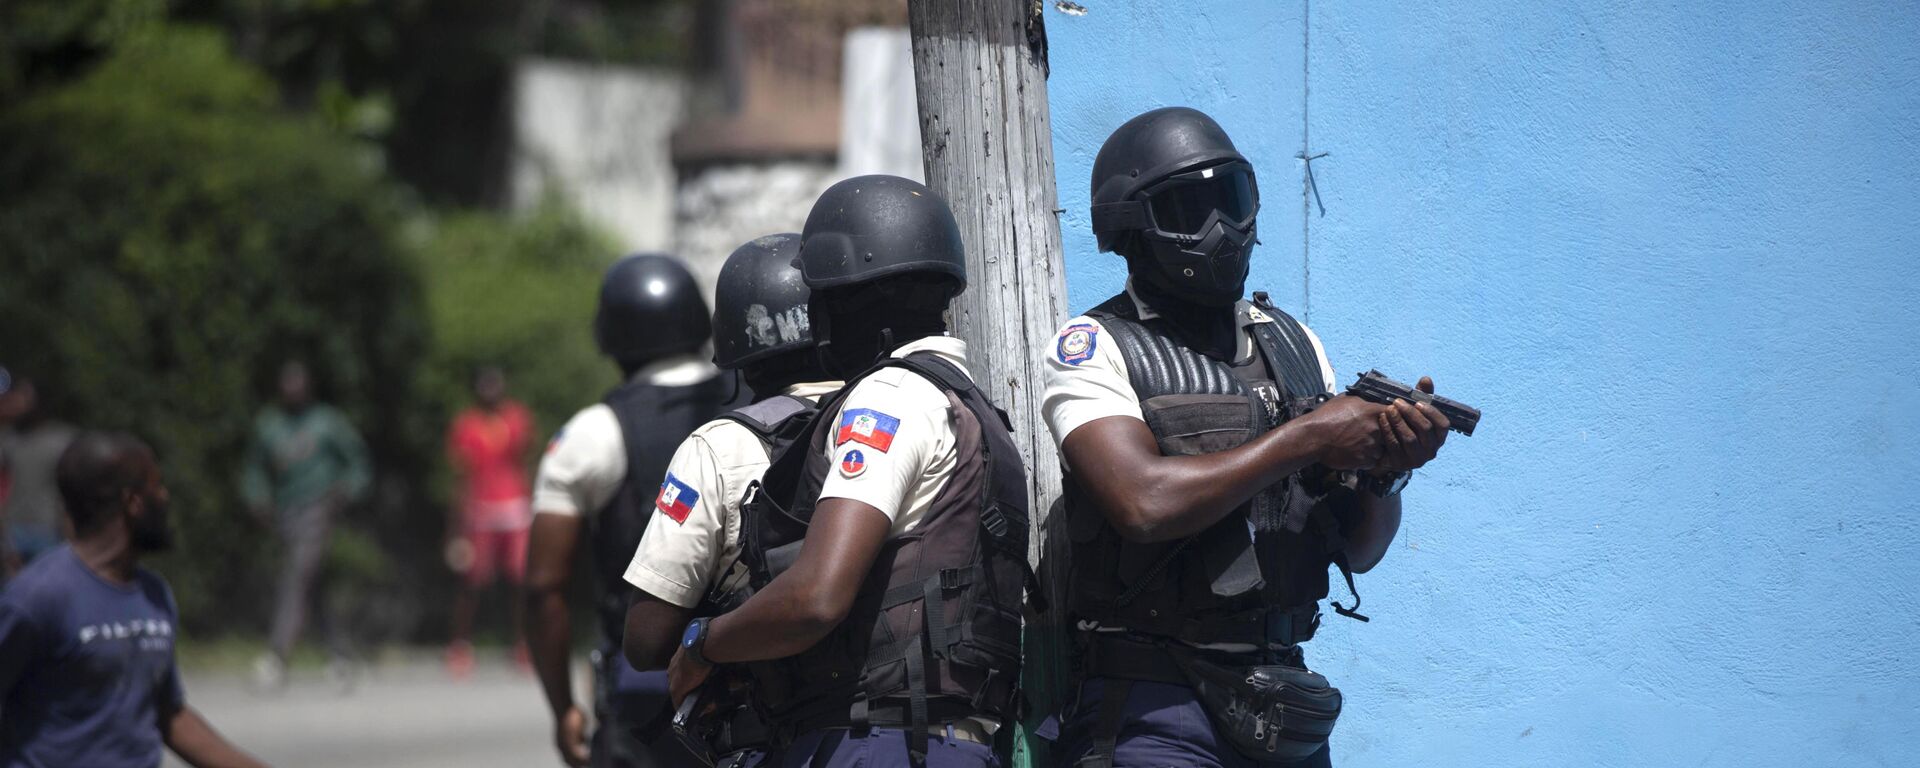 Police officers patrol in search for suspects in the murder Haiti's President Jovenel Moise, in Port-au-Prince, Haiti, Thursday, July 8, 2021. Moise was assassinated in an attack on his private residence early Wednesday. - Sputnik International, 1920, 09.07.2021